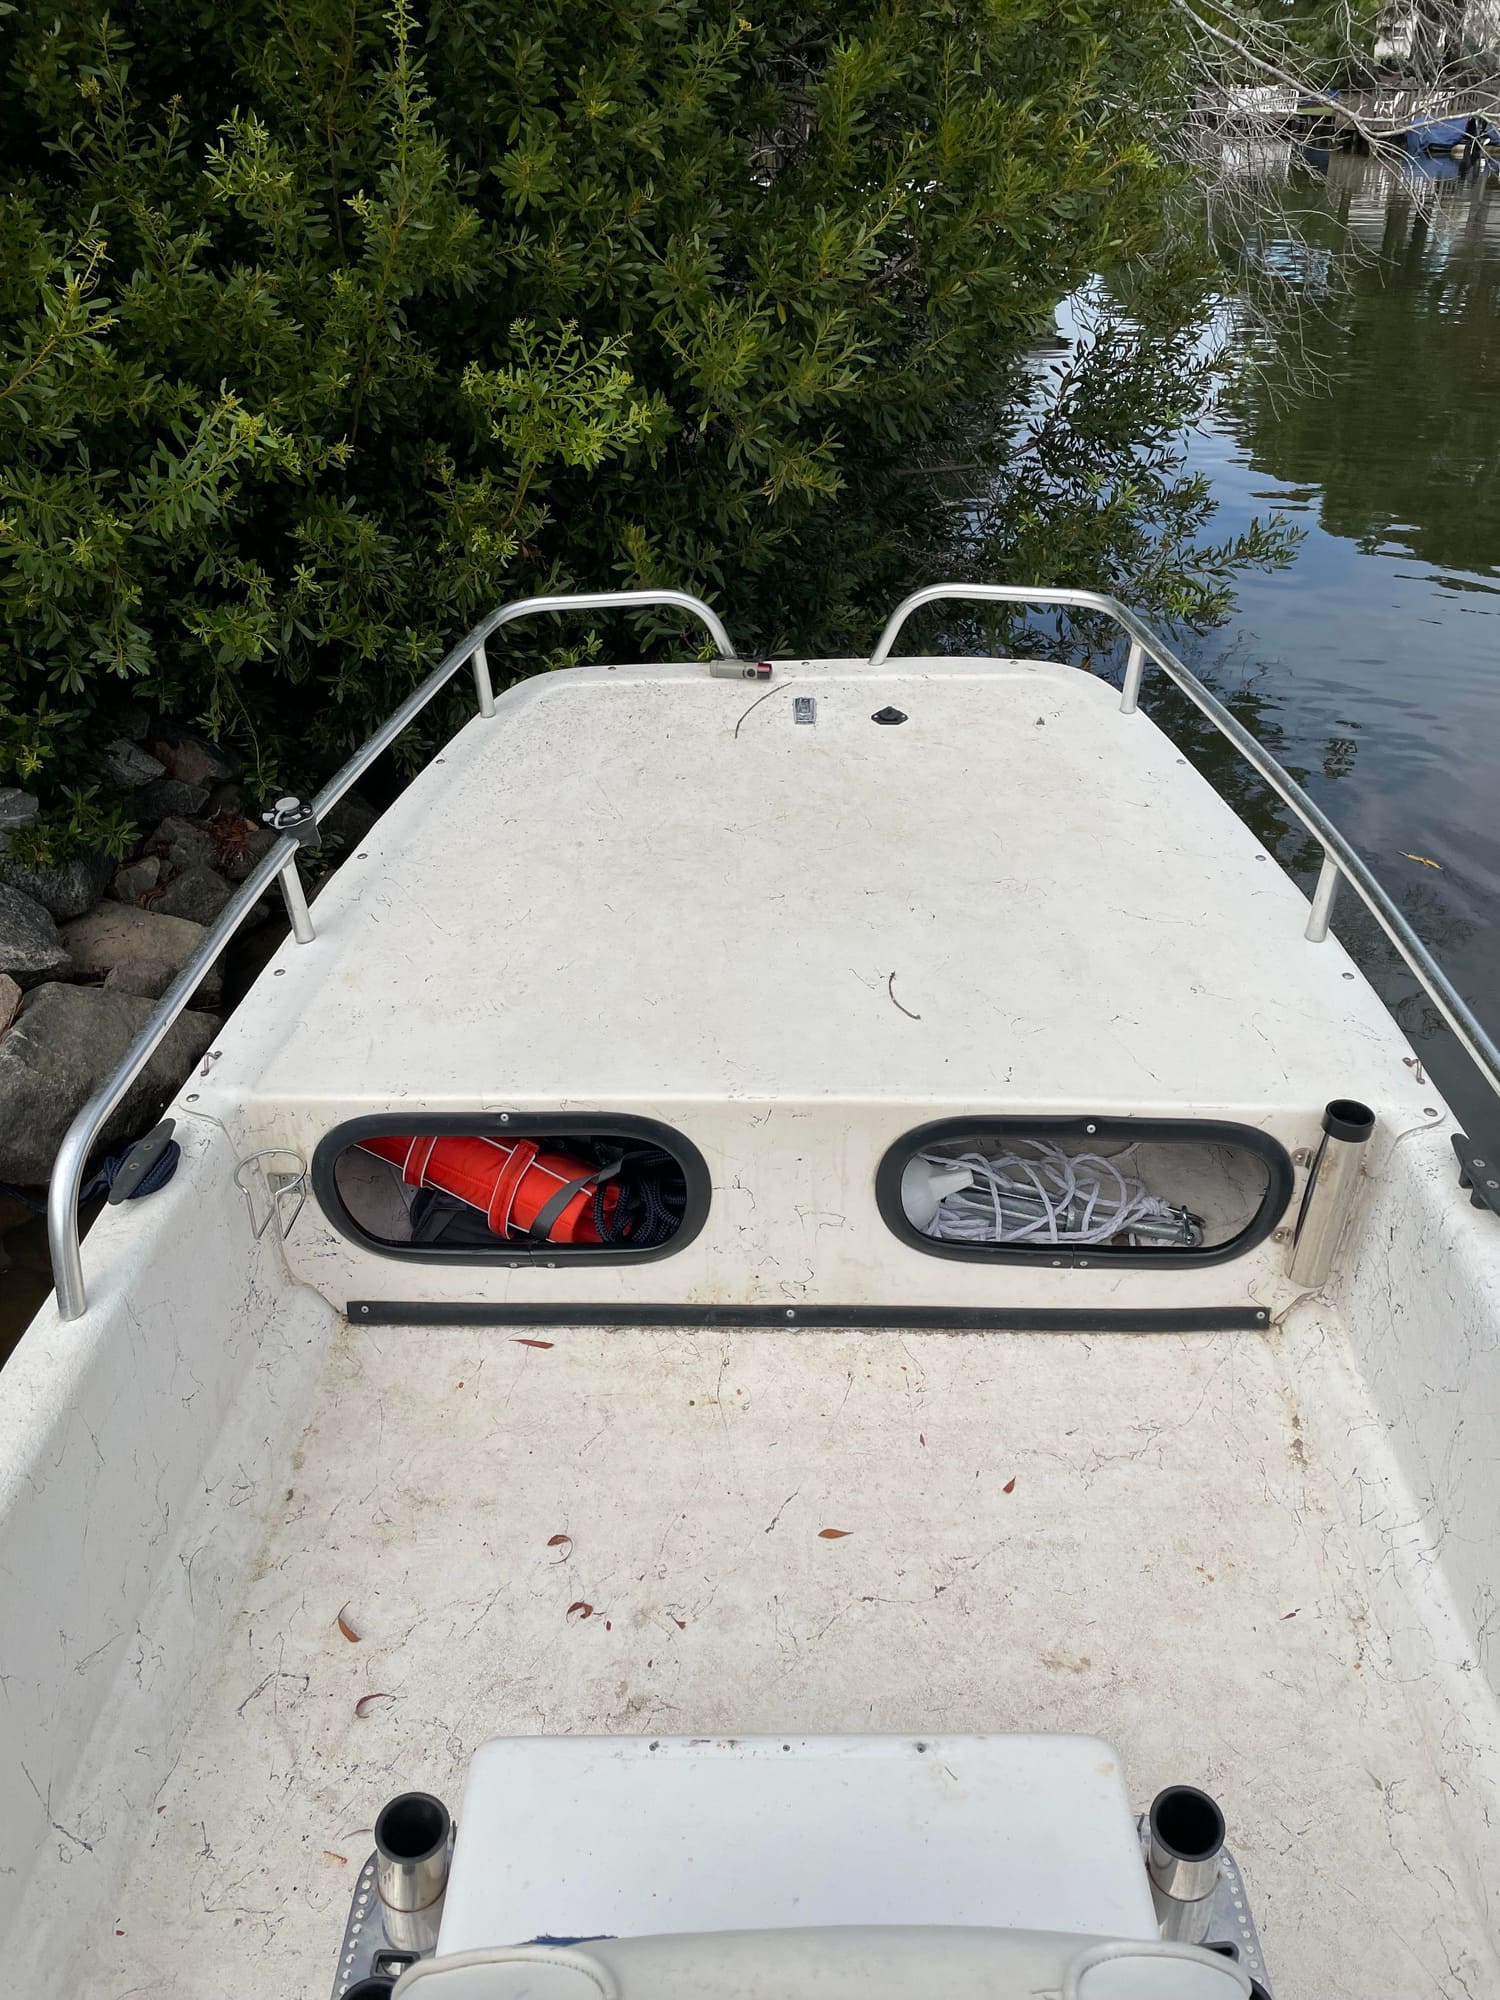 Choosing an unobtrusive trolling motor - The Hull Truth - Boating